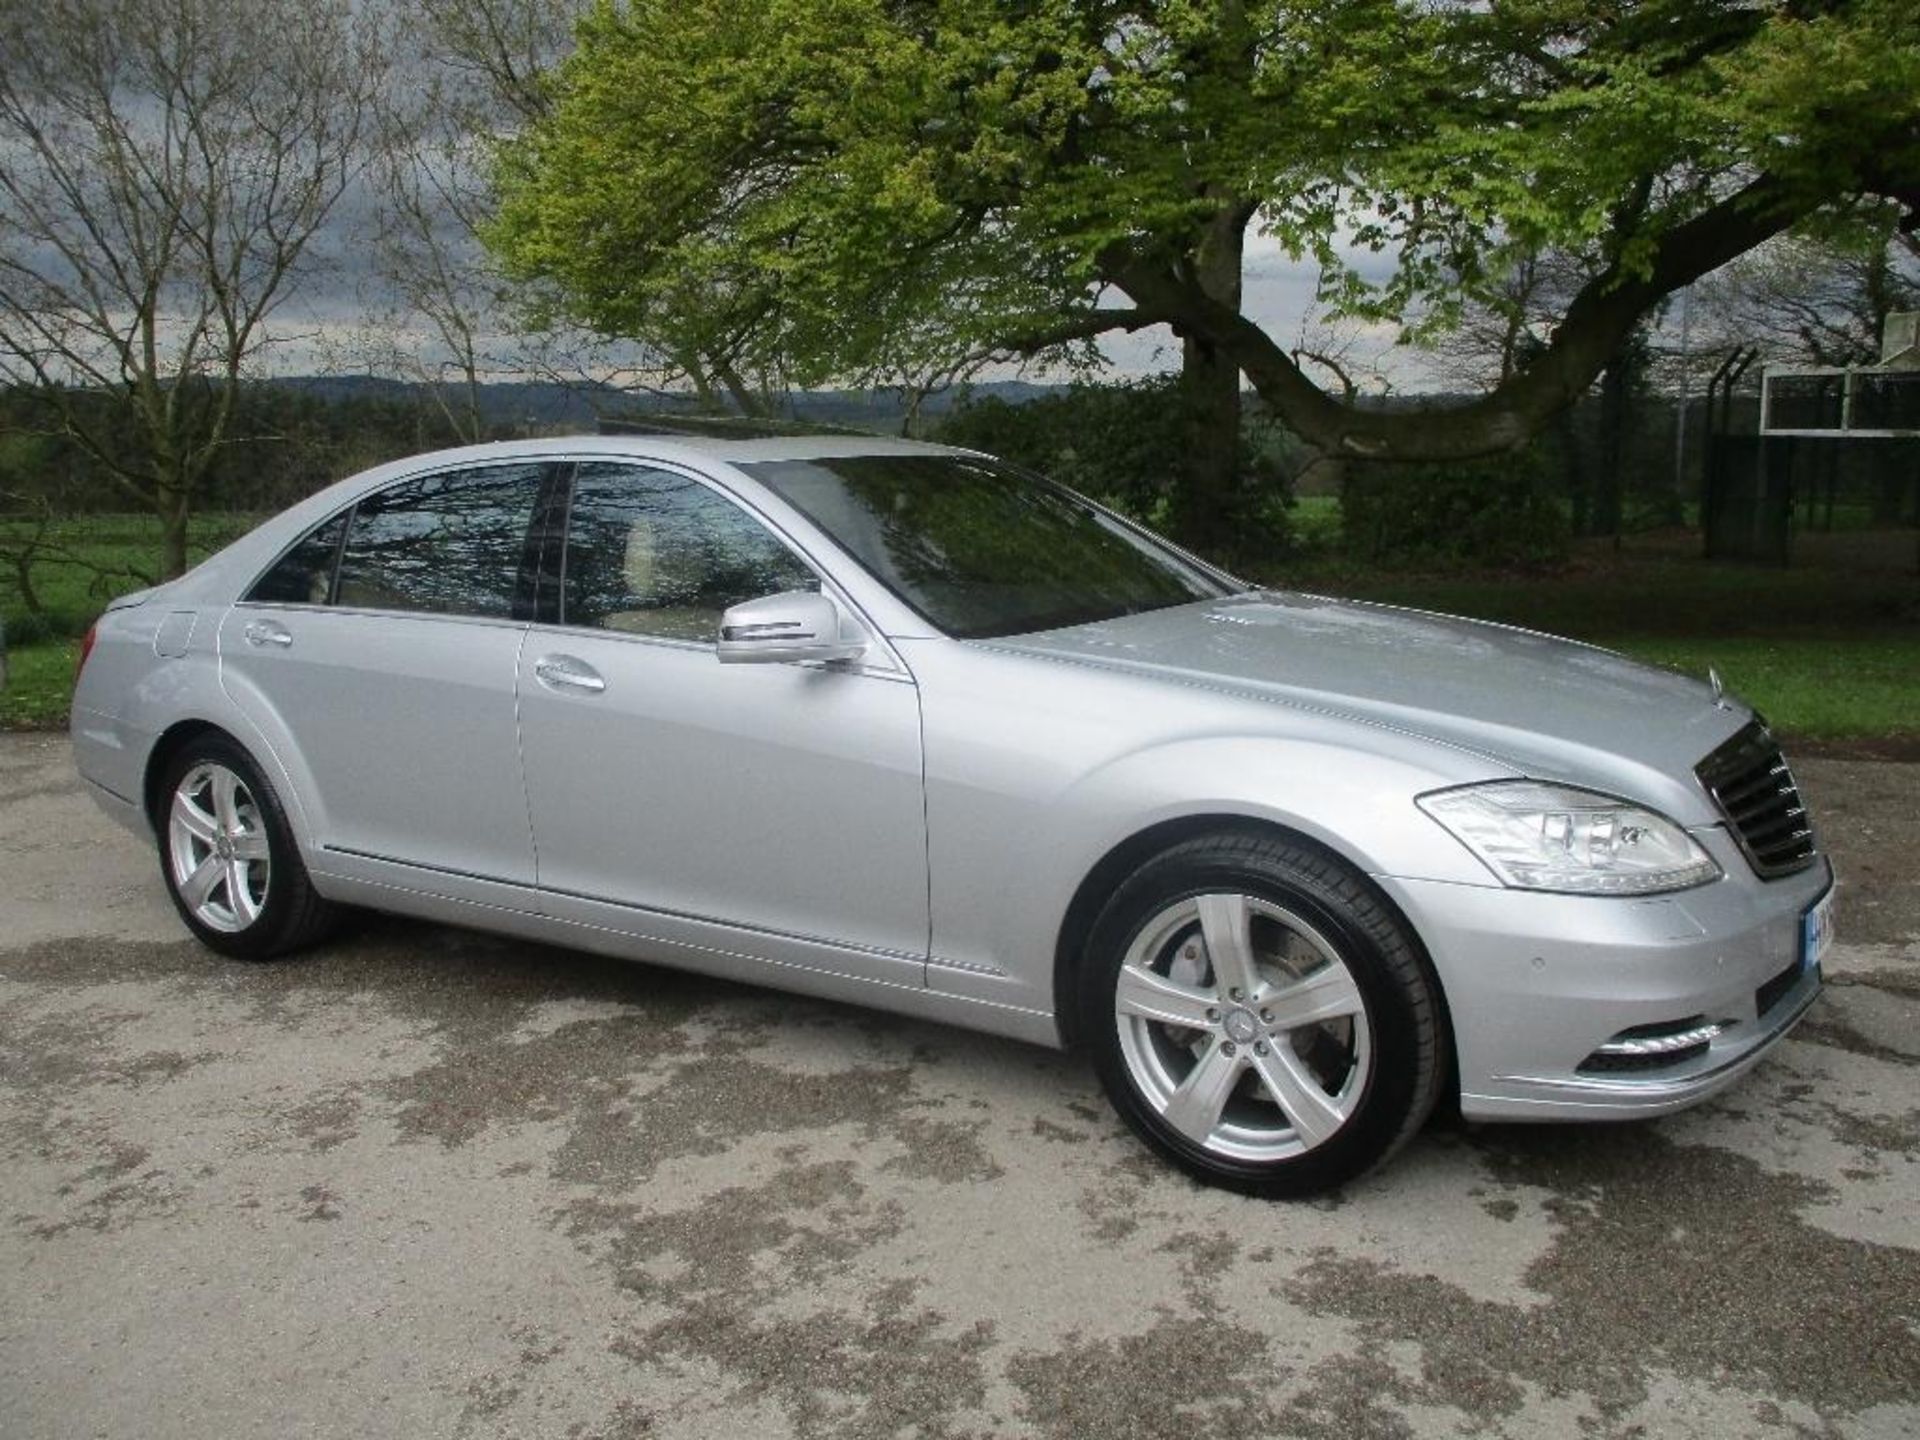 2010/60 REG MERCEDES-BENZ S500 L AUTOMATIC 5.5L PETROL 4 DOOR SALOON, SHOWING 0 FORMER KEEPERS - Image 2 of 9